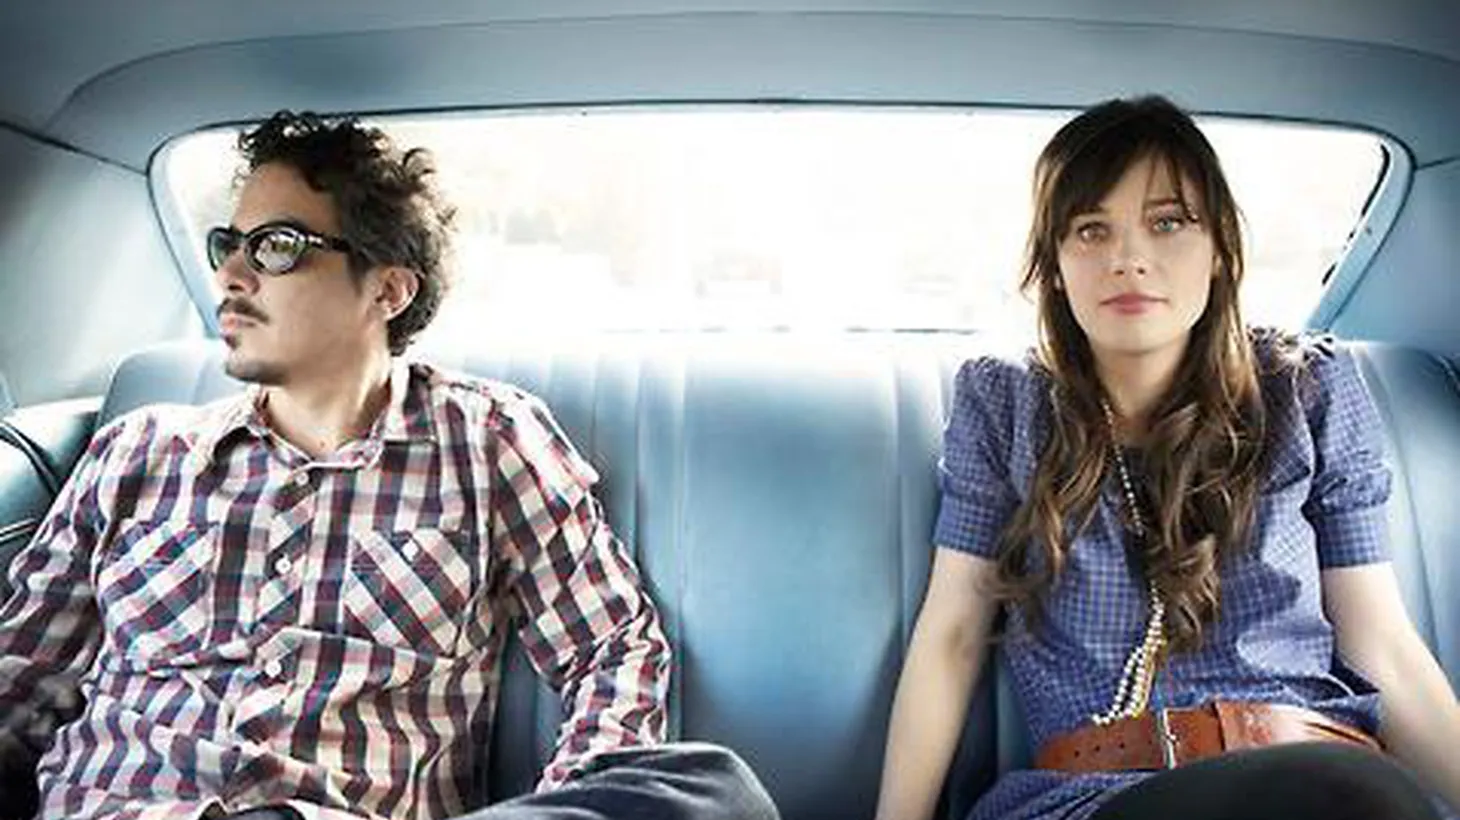 Zooey Deschanel and M. Ward, of the band She & Him, stop by in anticipation of their headlining performance at the Hollywood Bowl as part of KCRW's World Festival.